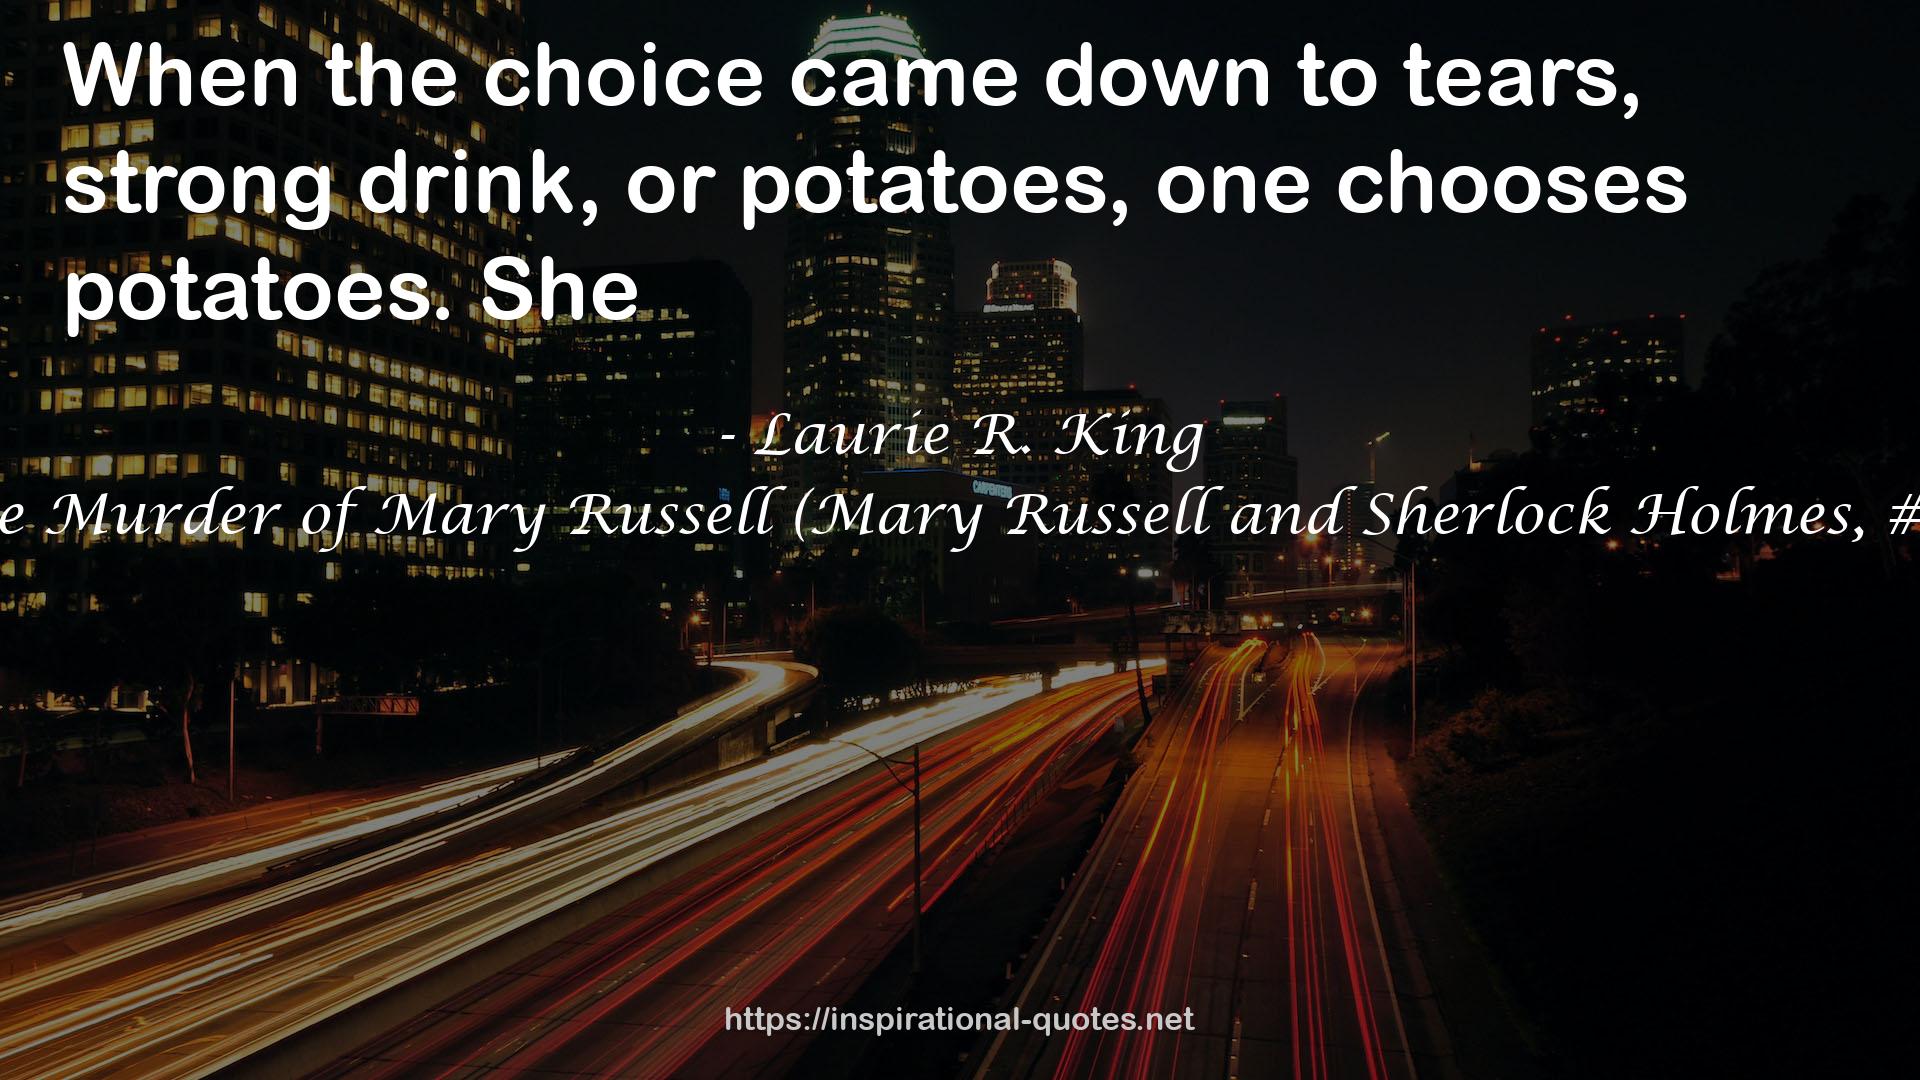 The Murder of Mary Russell (Mary Russell and Sherlock Holmes, #14) QUOTES